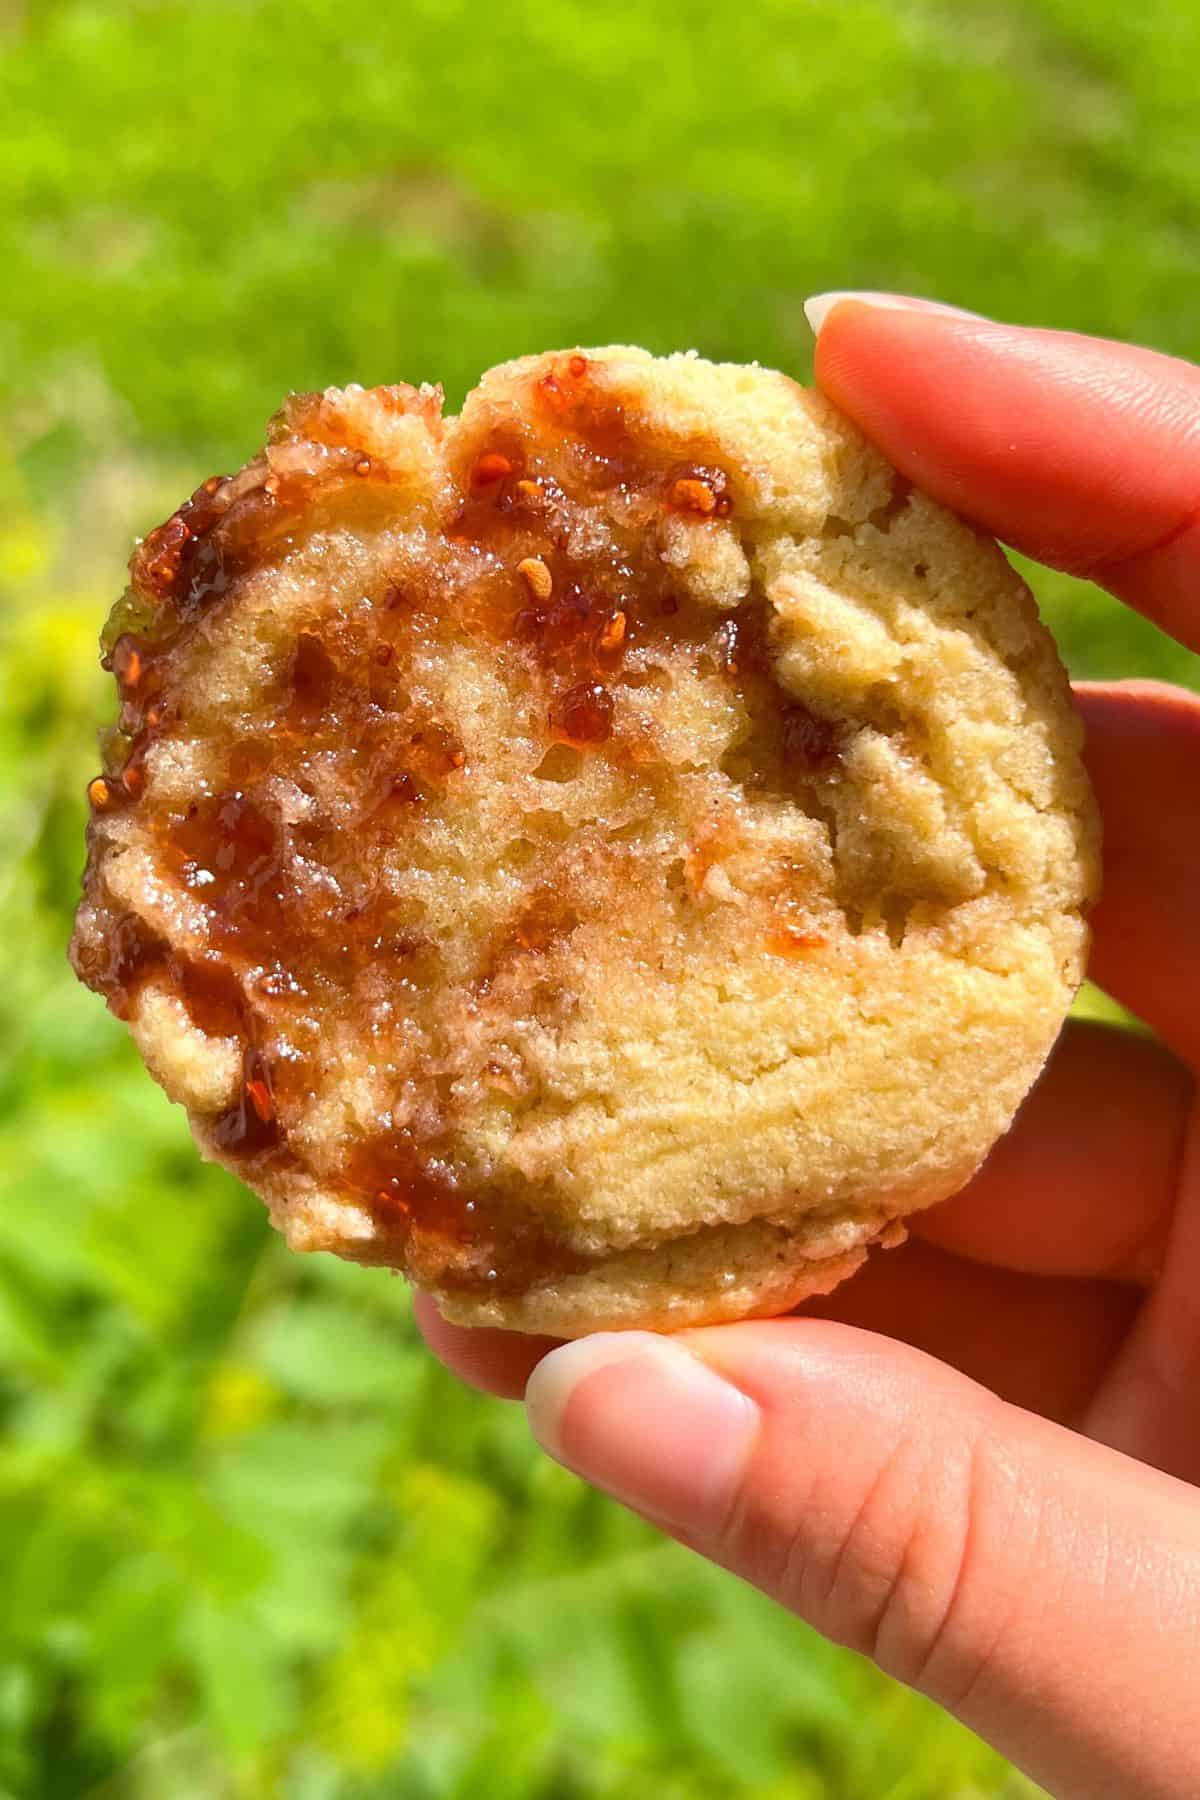 Holding a Strawberry Jam Cookie in my hand.